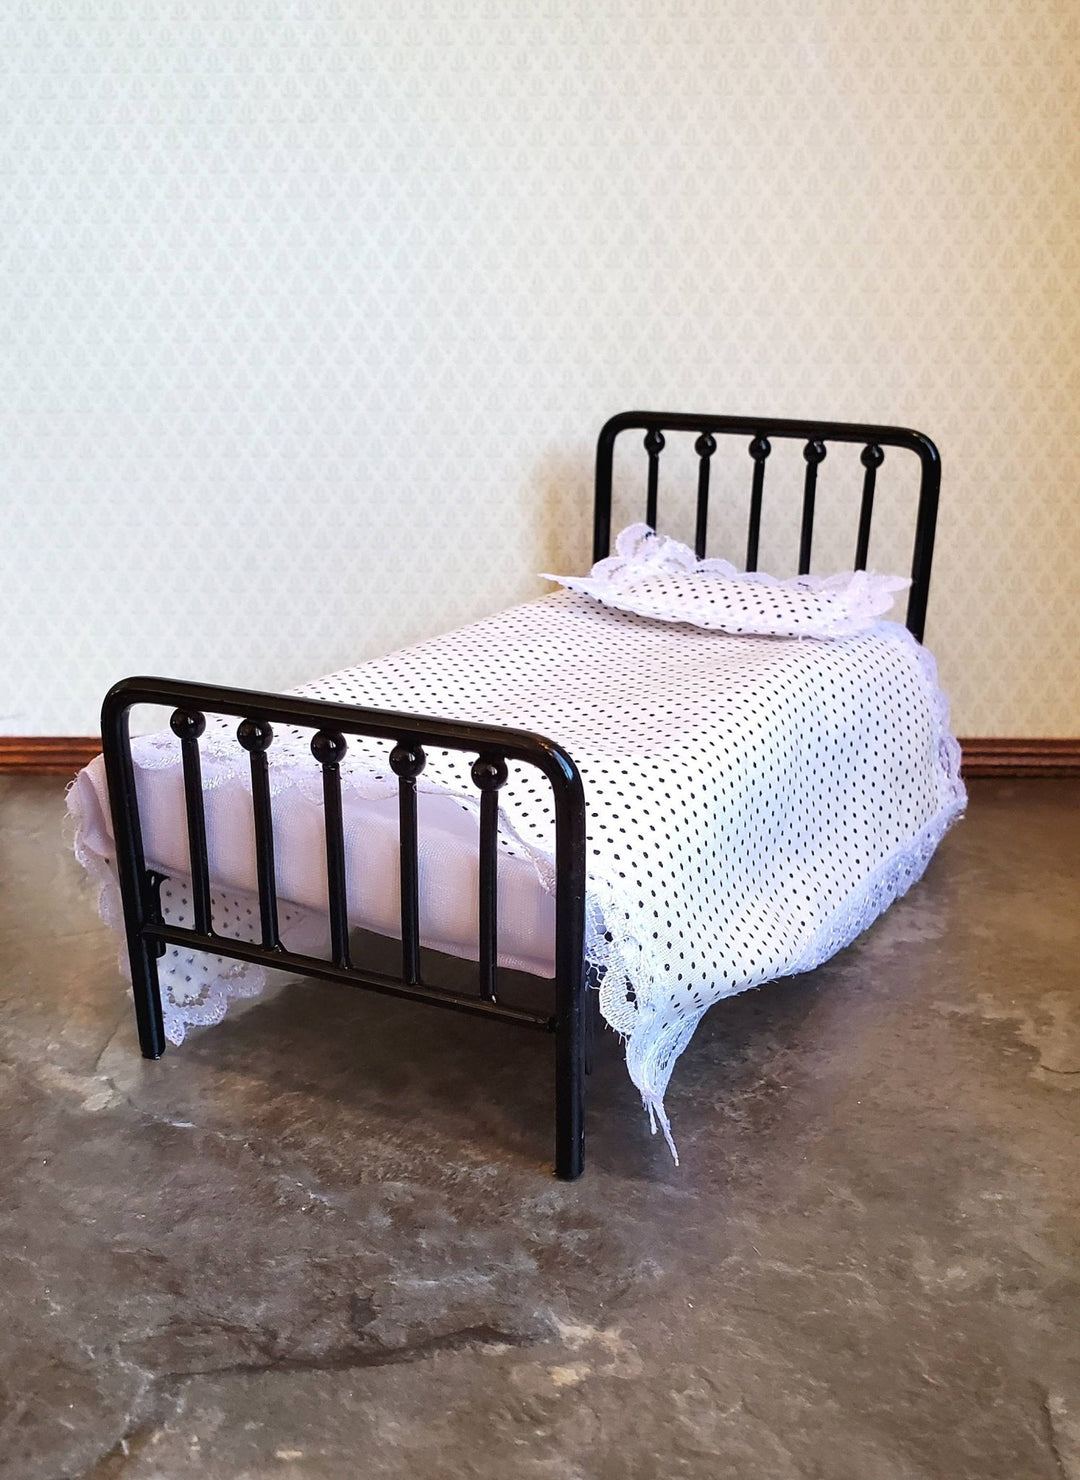 Dollhouse Miniature Bed Black Metal with Mattress Pillow Blanket 1:12 Scale Furniture - Miniature Crush